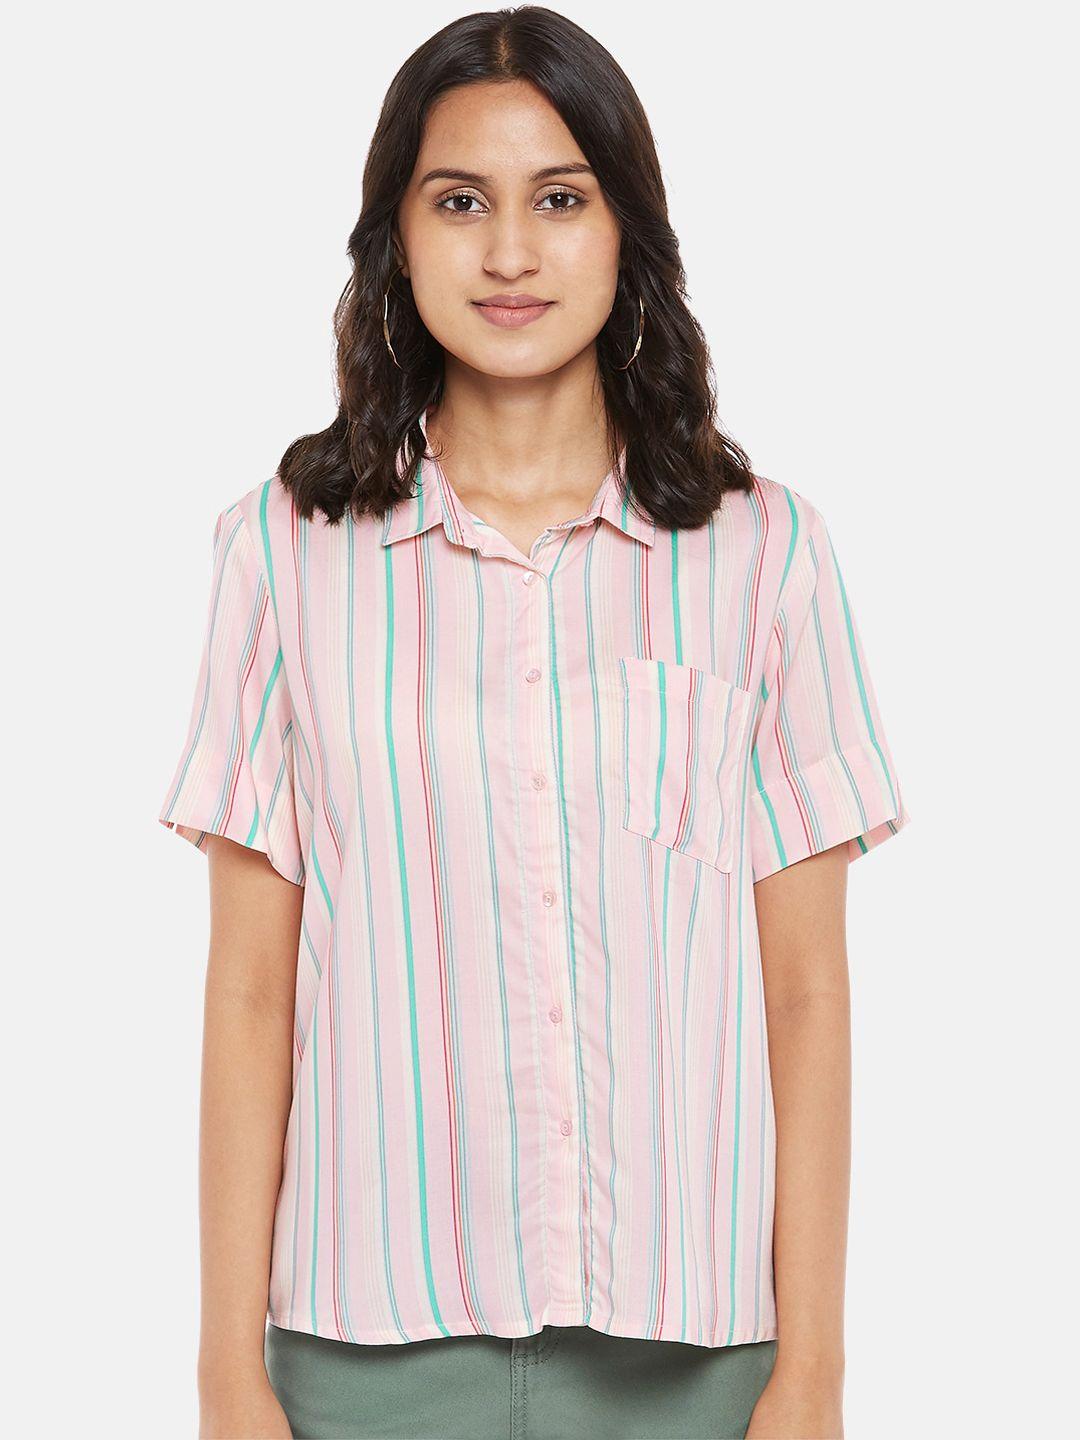 honey by pantaloons women pink opaque striped casual shirt